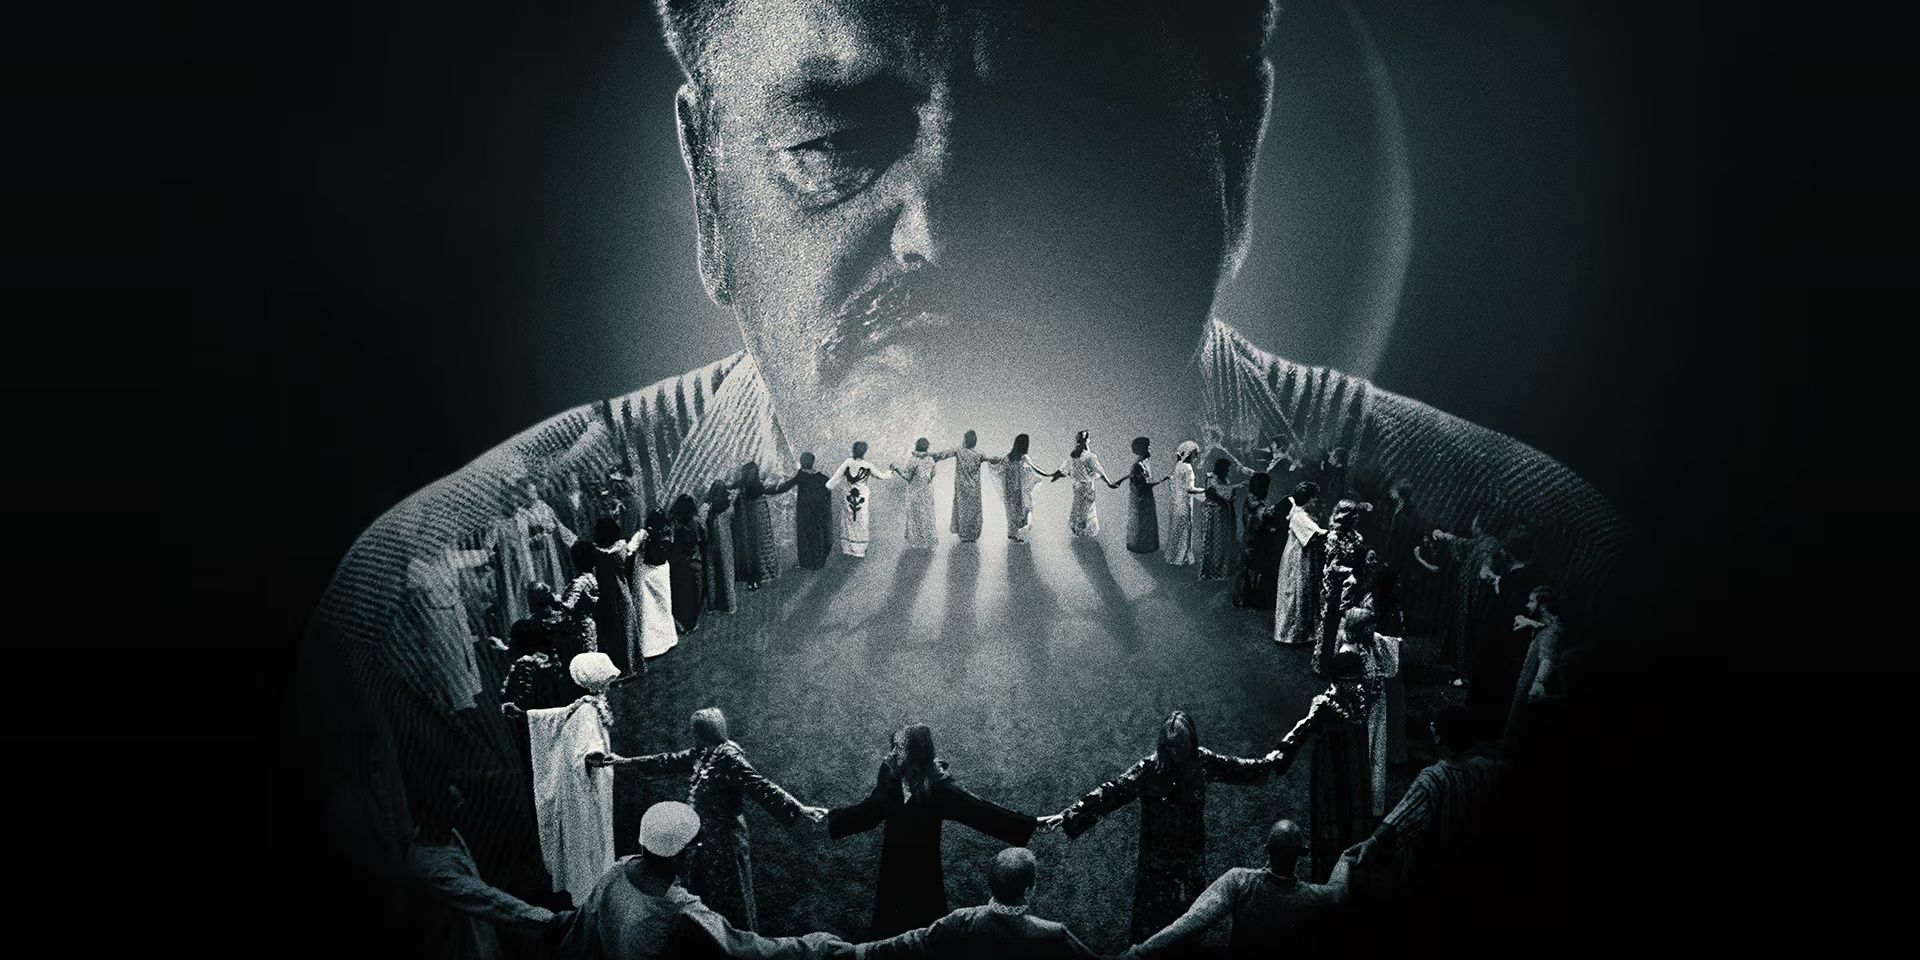 Chuck Dederich's head superimposed over a circle of people holding hands, in black and white, as shown in The Synanon Fix